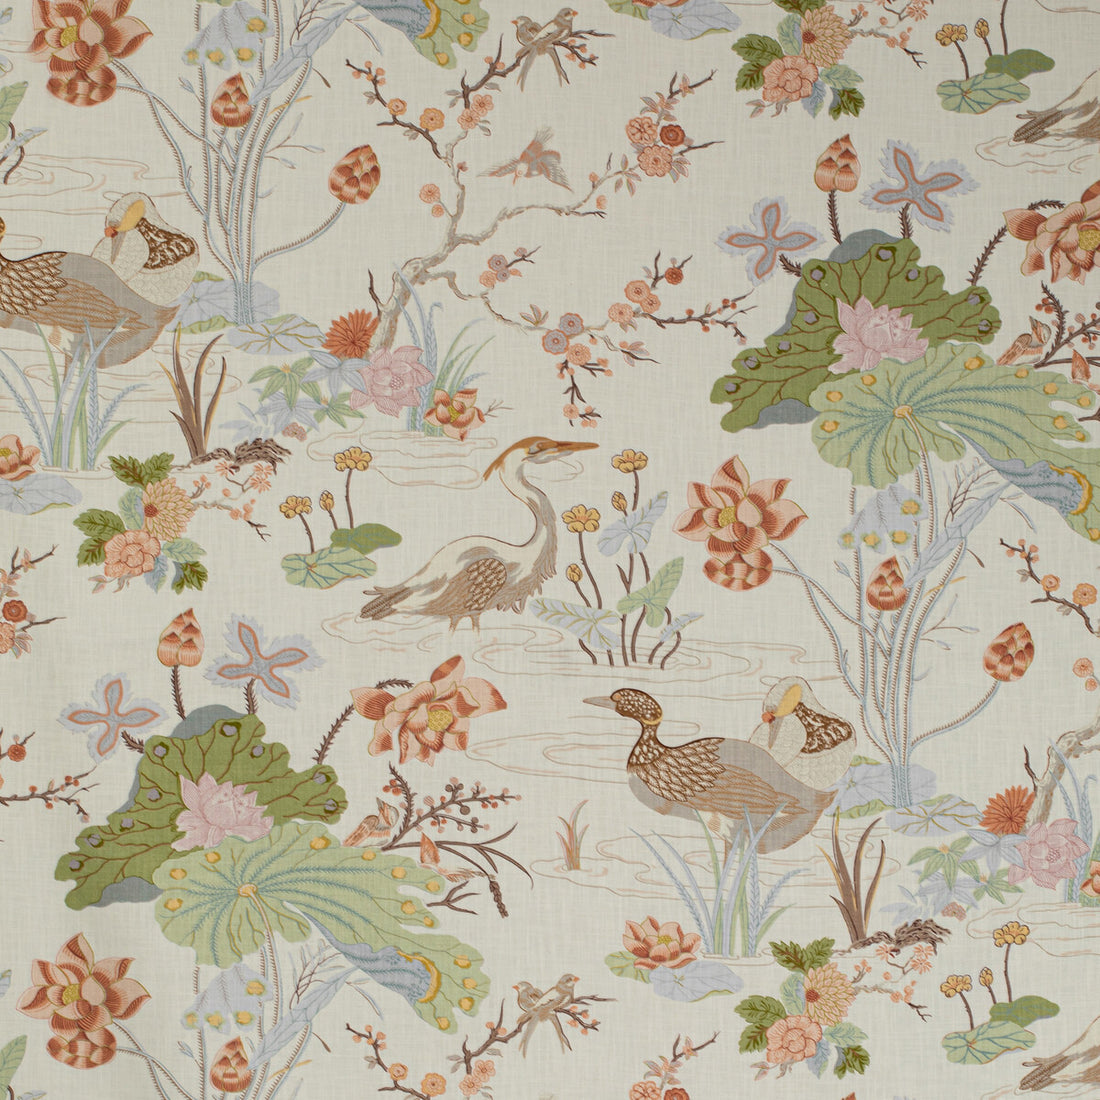 Luzon Print fabric in apricot color - pattern 2020198.223.0 - by Lee Jofa in the Mindoro collection